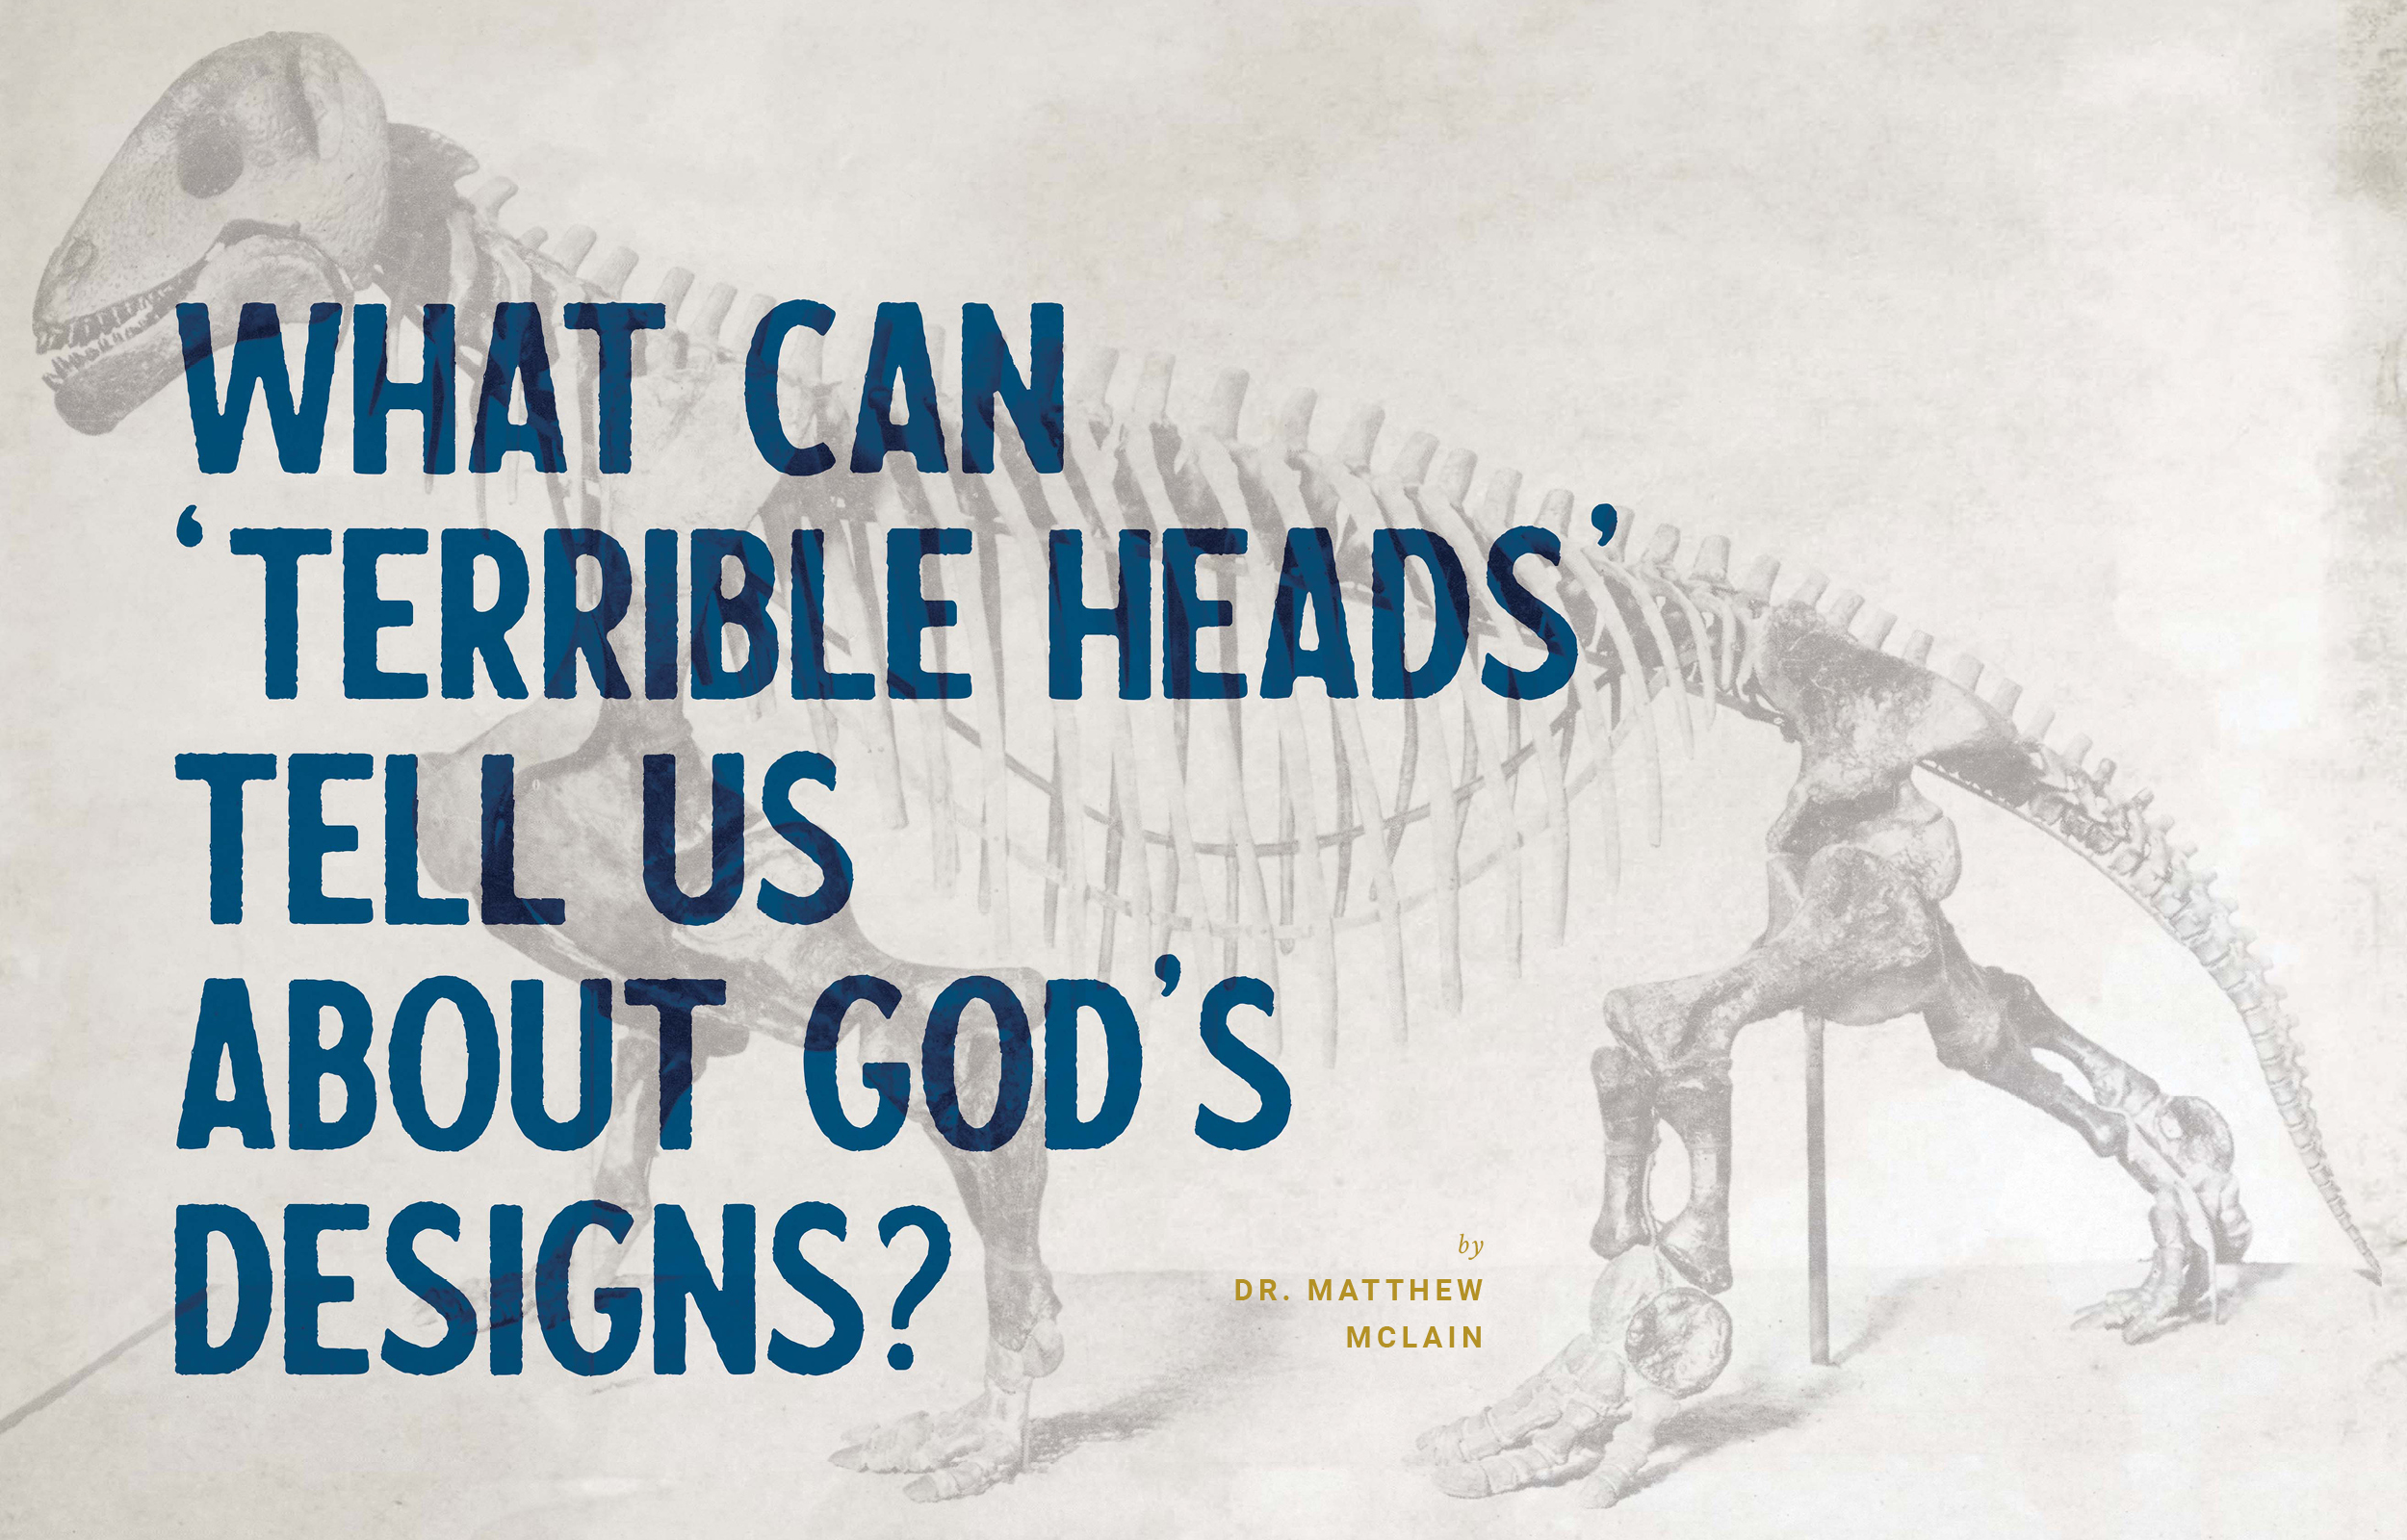 What Can ‘Terrible Heads’ Tell us About God’s Designs?